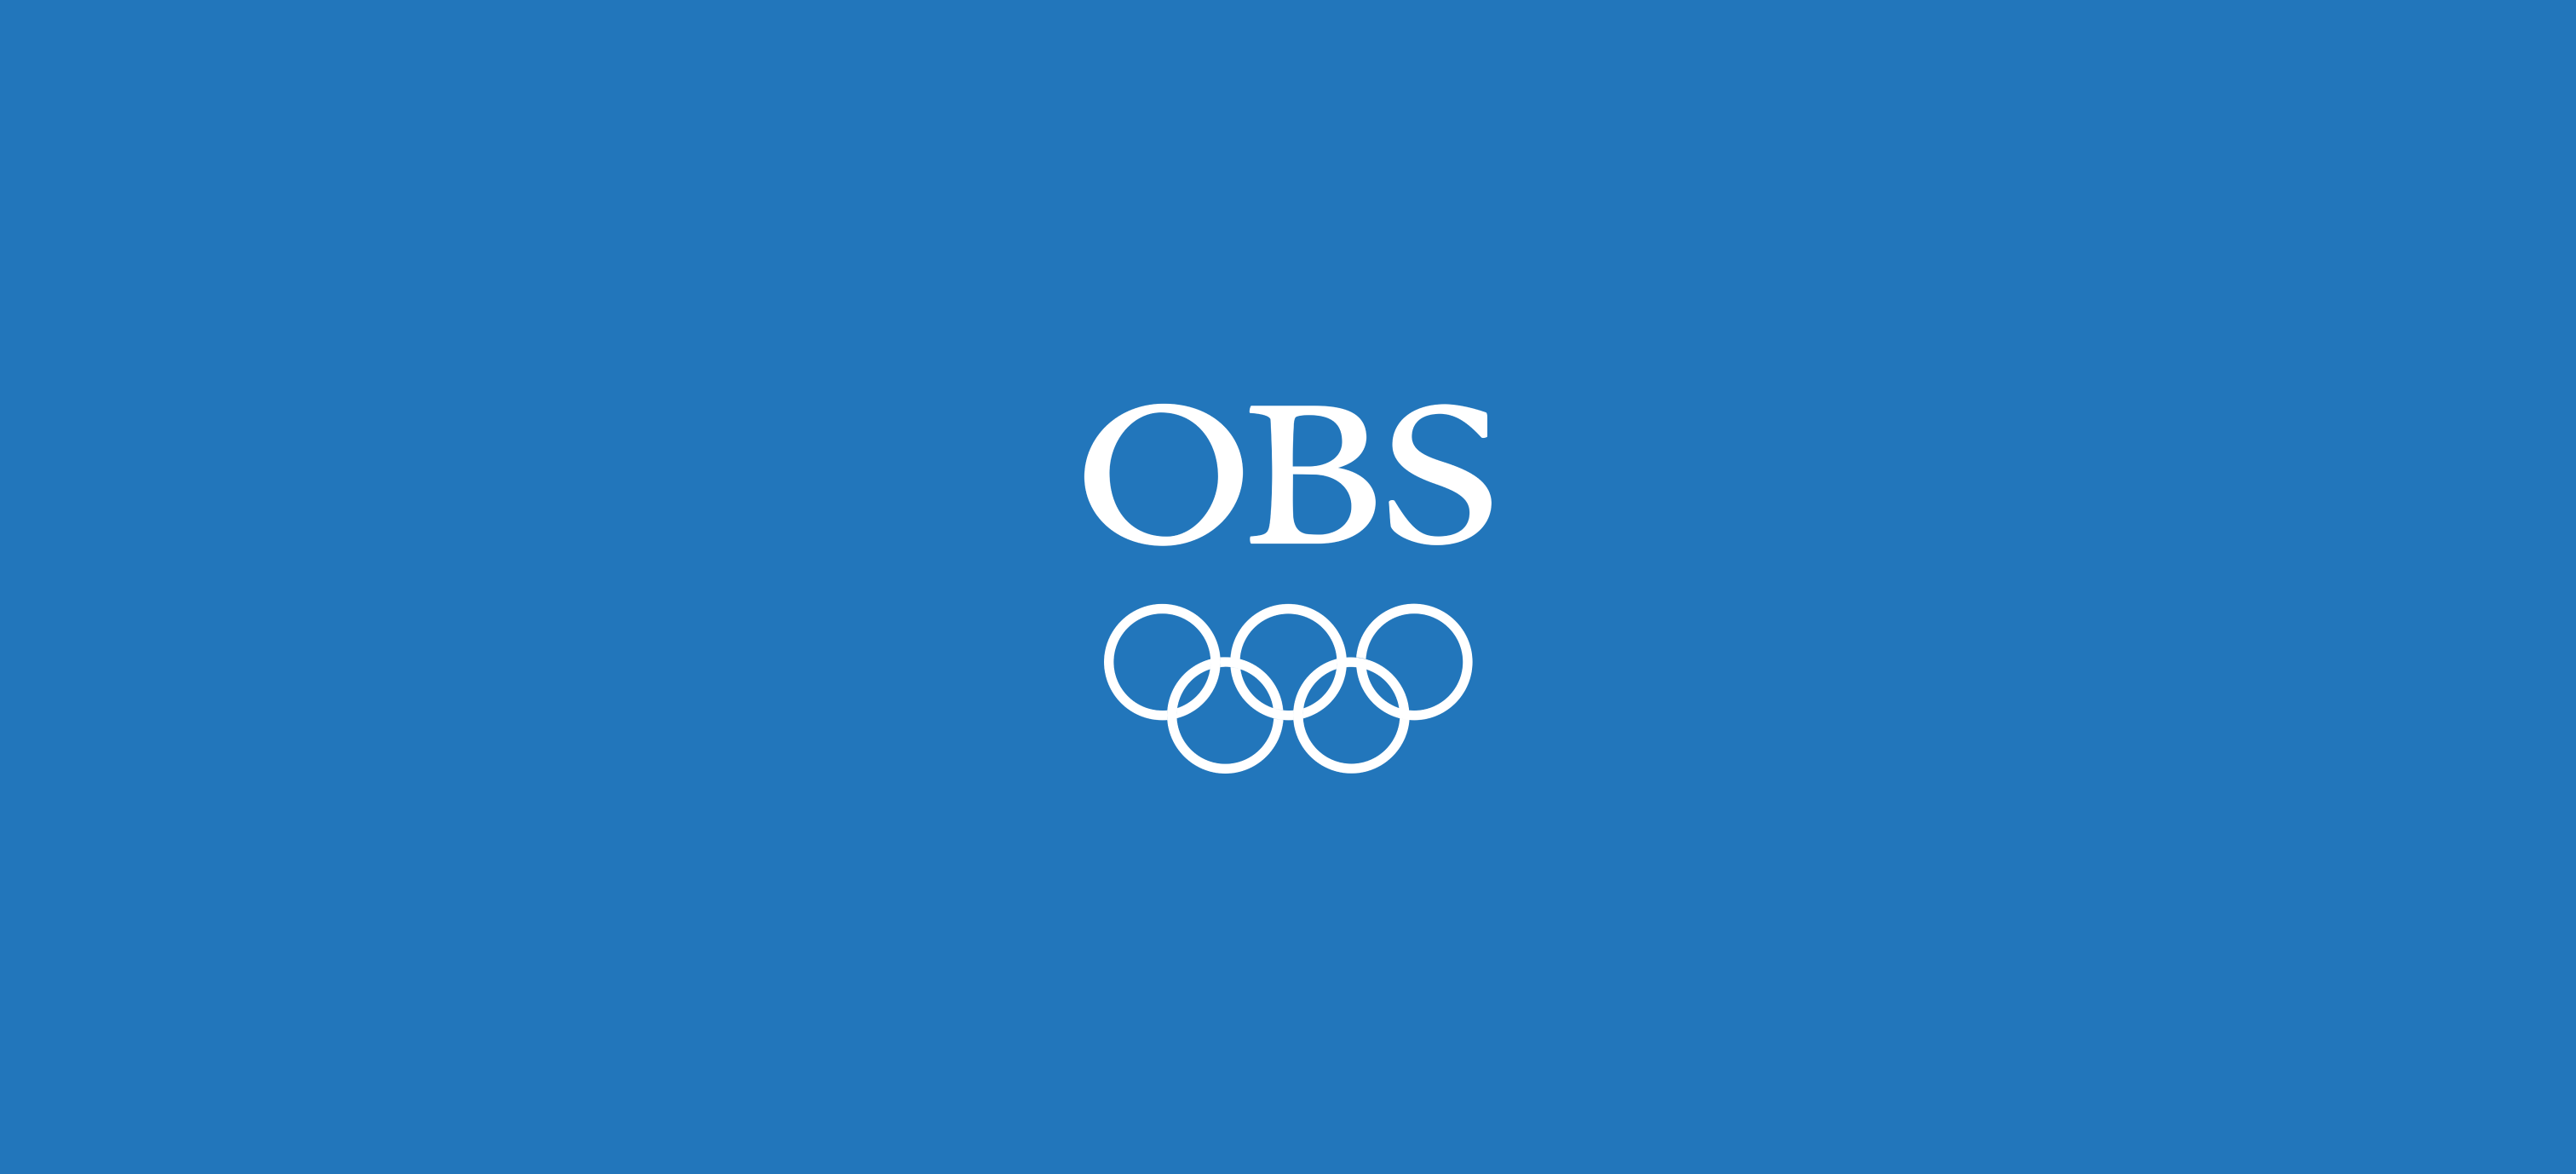 Olympic Broadcasting Services logo